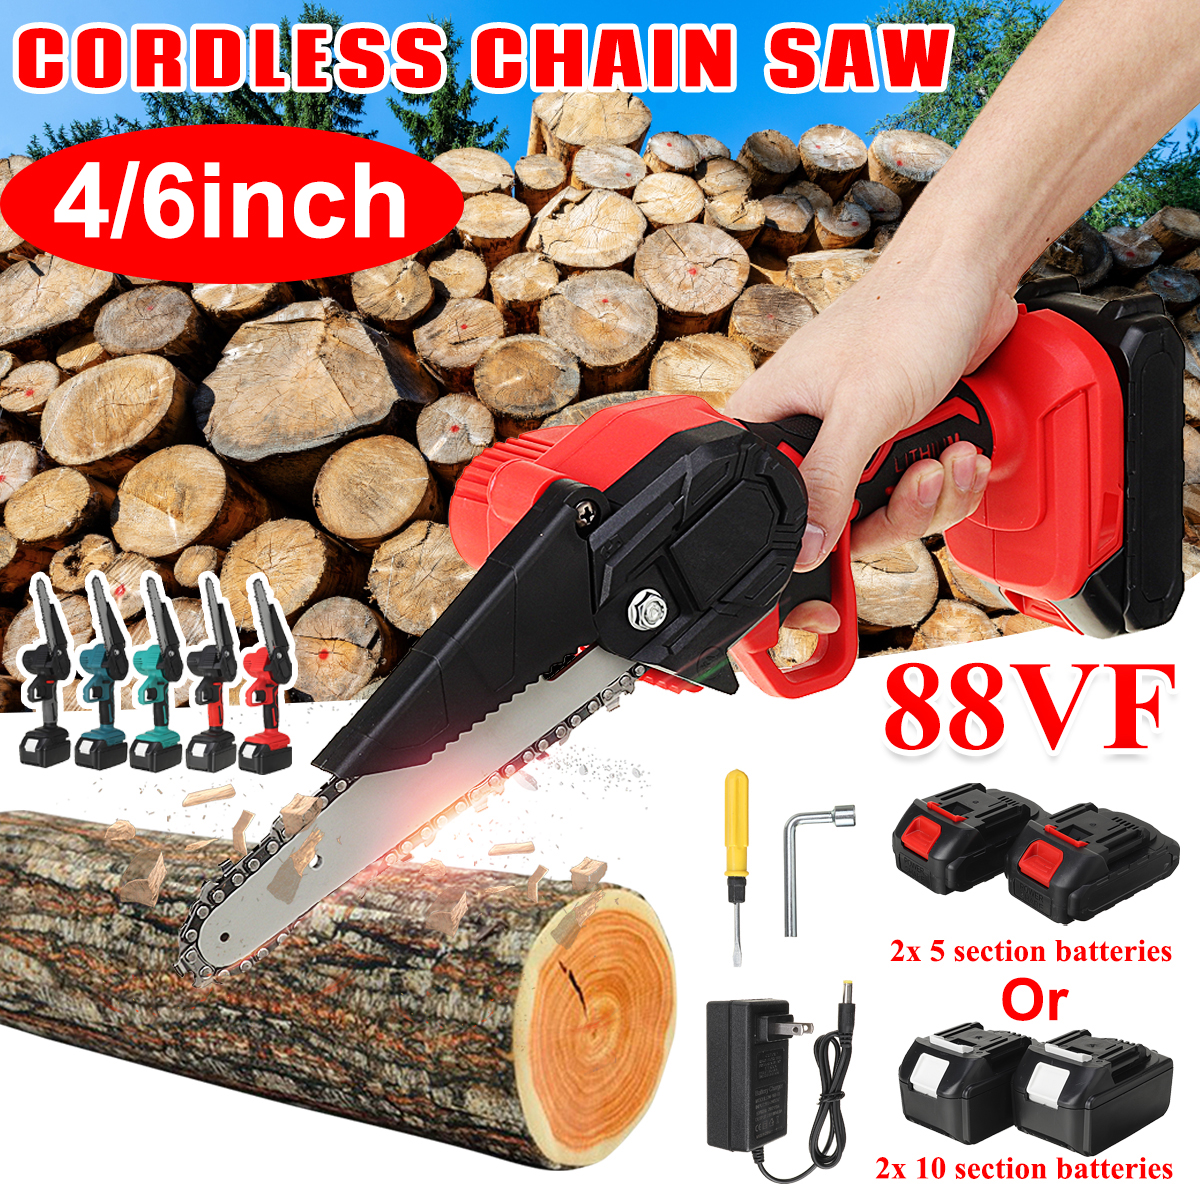 21V-46-Inch-Cordless-Electric-Chain-Saw-One-Hand-Saw-Mini-Portable-Woodworking-Wood-Cutter-W-2pcs-Ba-1880984-2